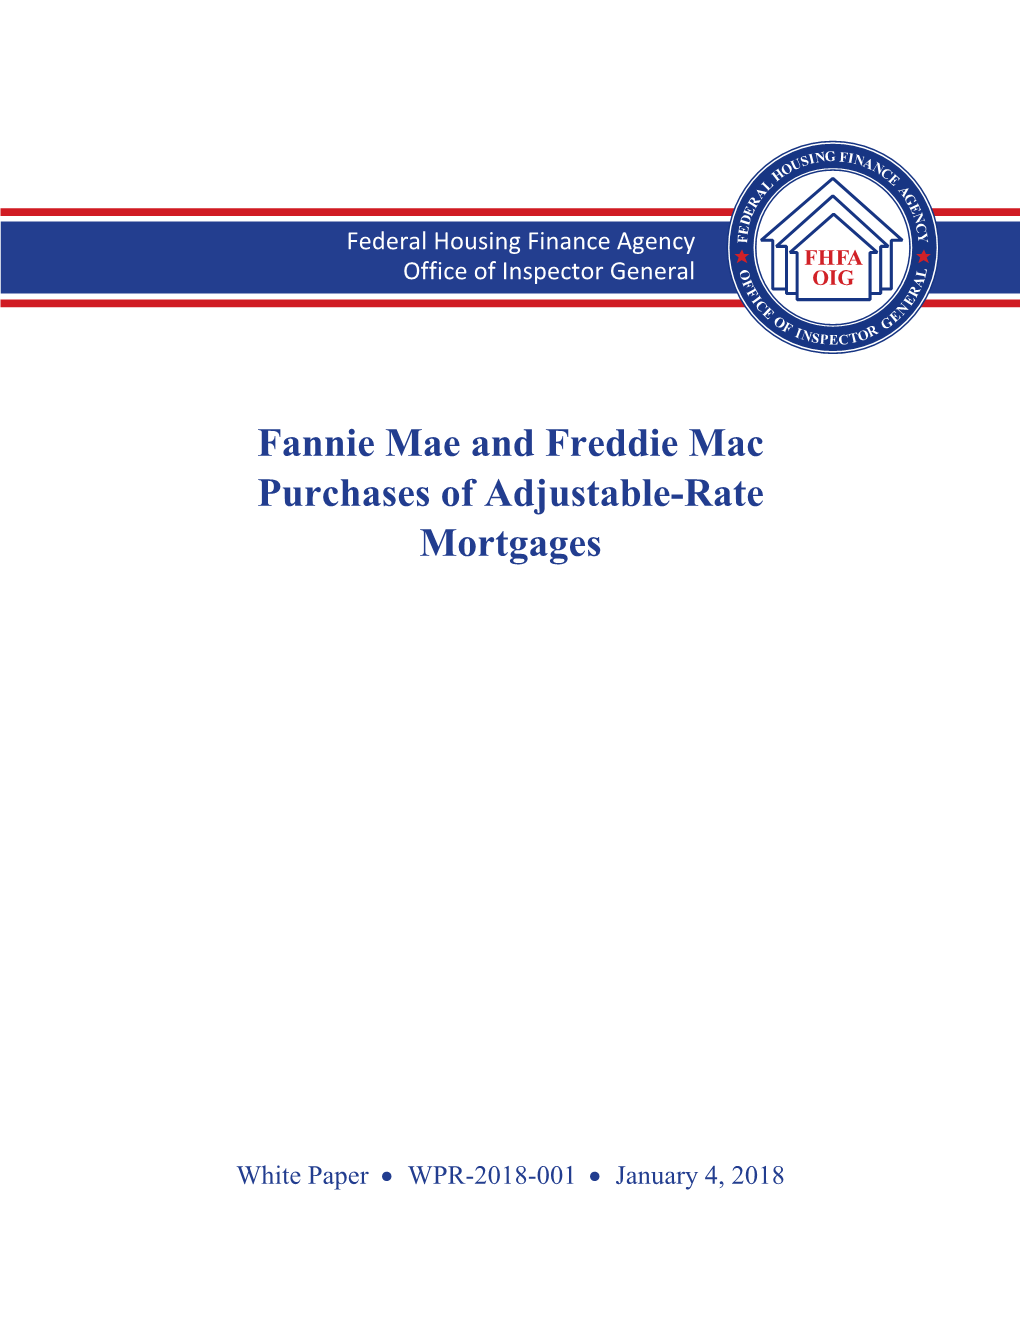 Fannie Mae and Freddie Mac Purchases of Adjustable-Rate Mortgages